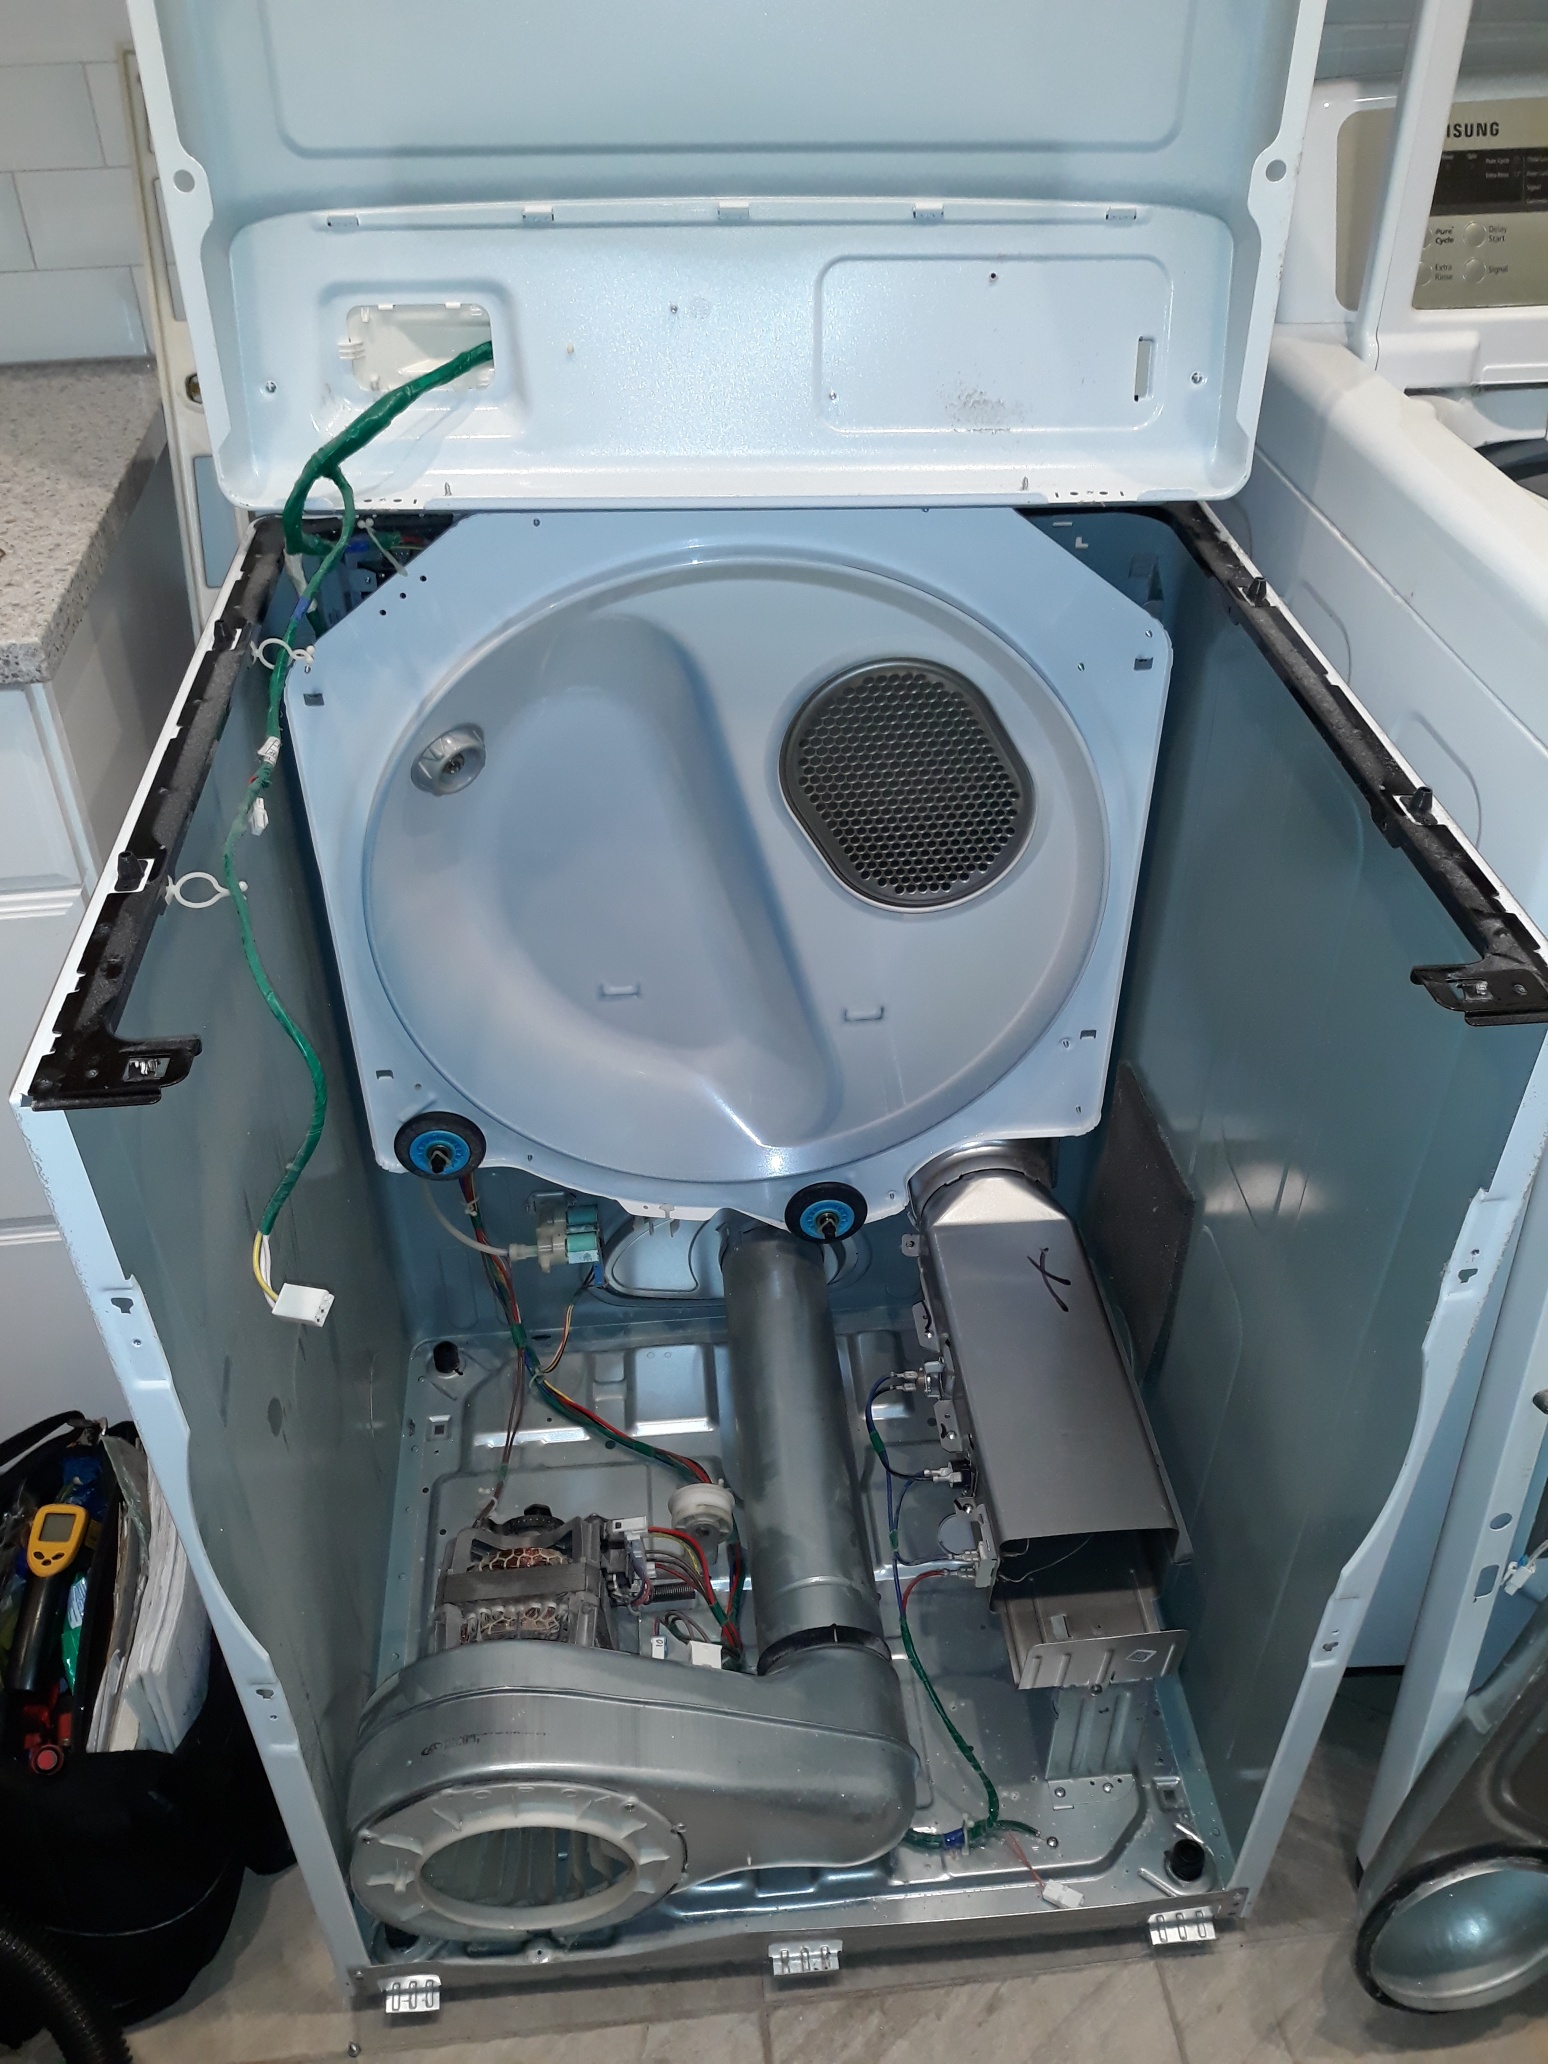 appliance repair dryer repair repair required replacement of the heating element assembly due to an open element coil circuit bronson dr coleman wildwood fl 34785